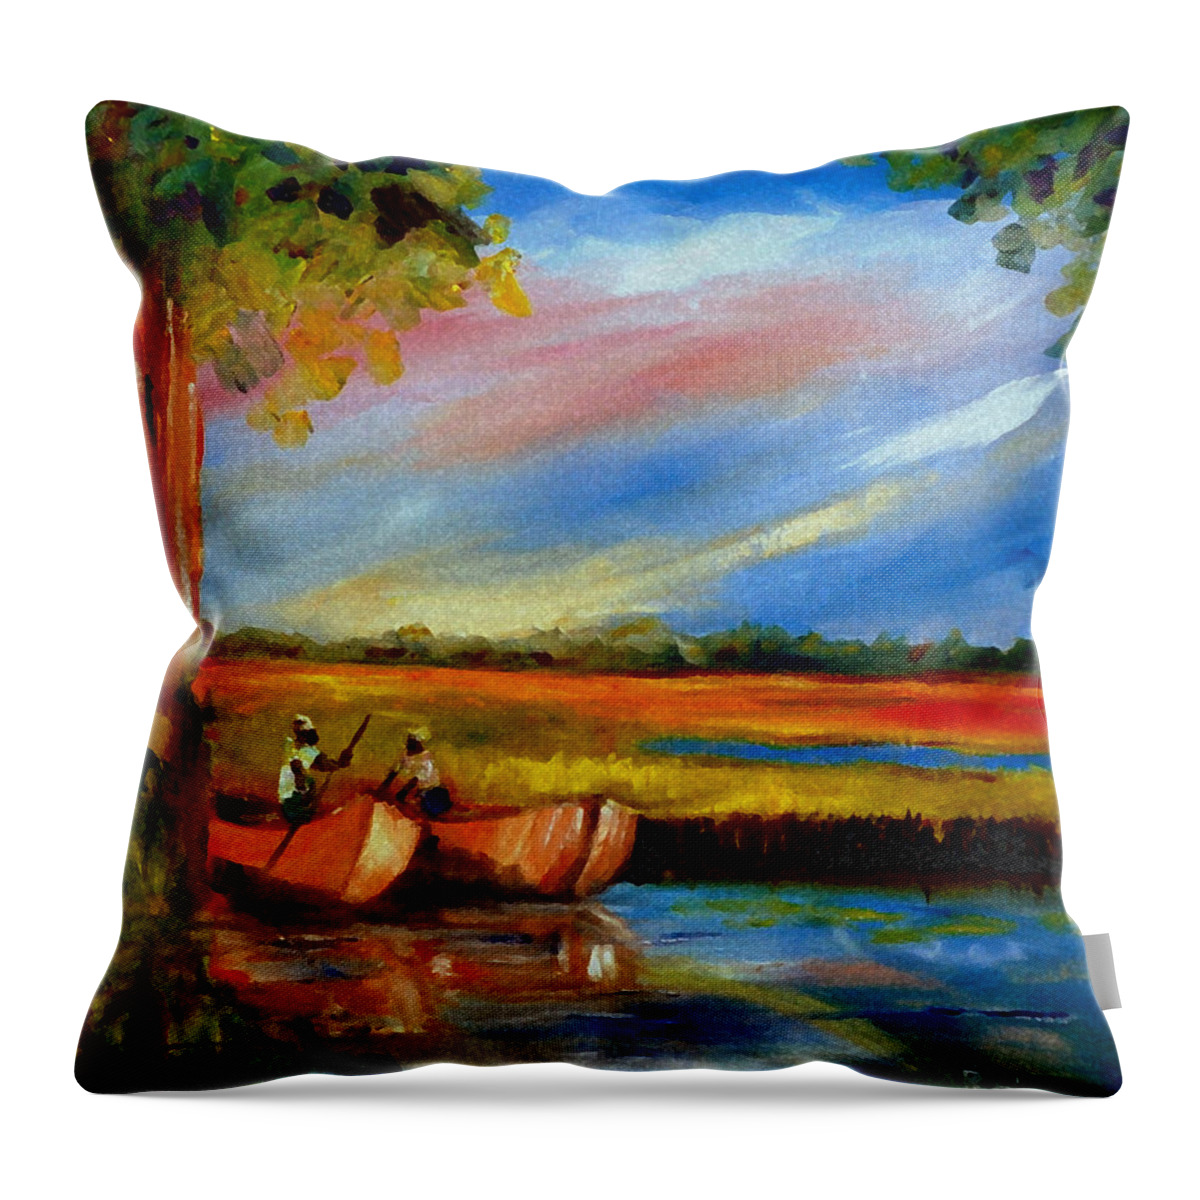 Gullah Lowcountry Sc Throw Pillow featuring the painting Gullah Lowcountry SC by Phil Burton